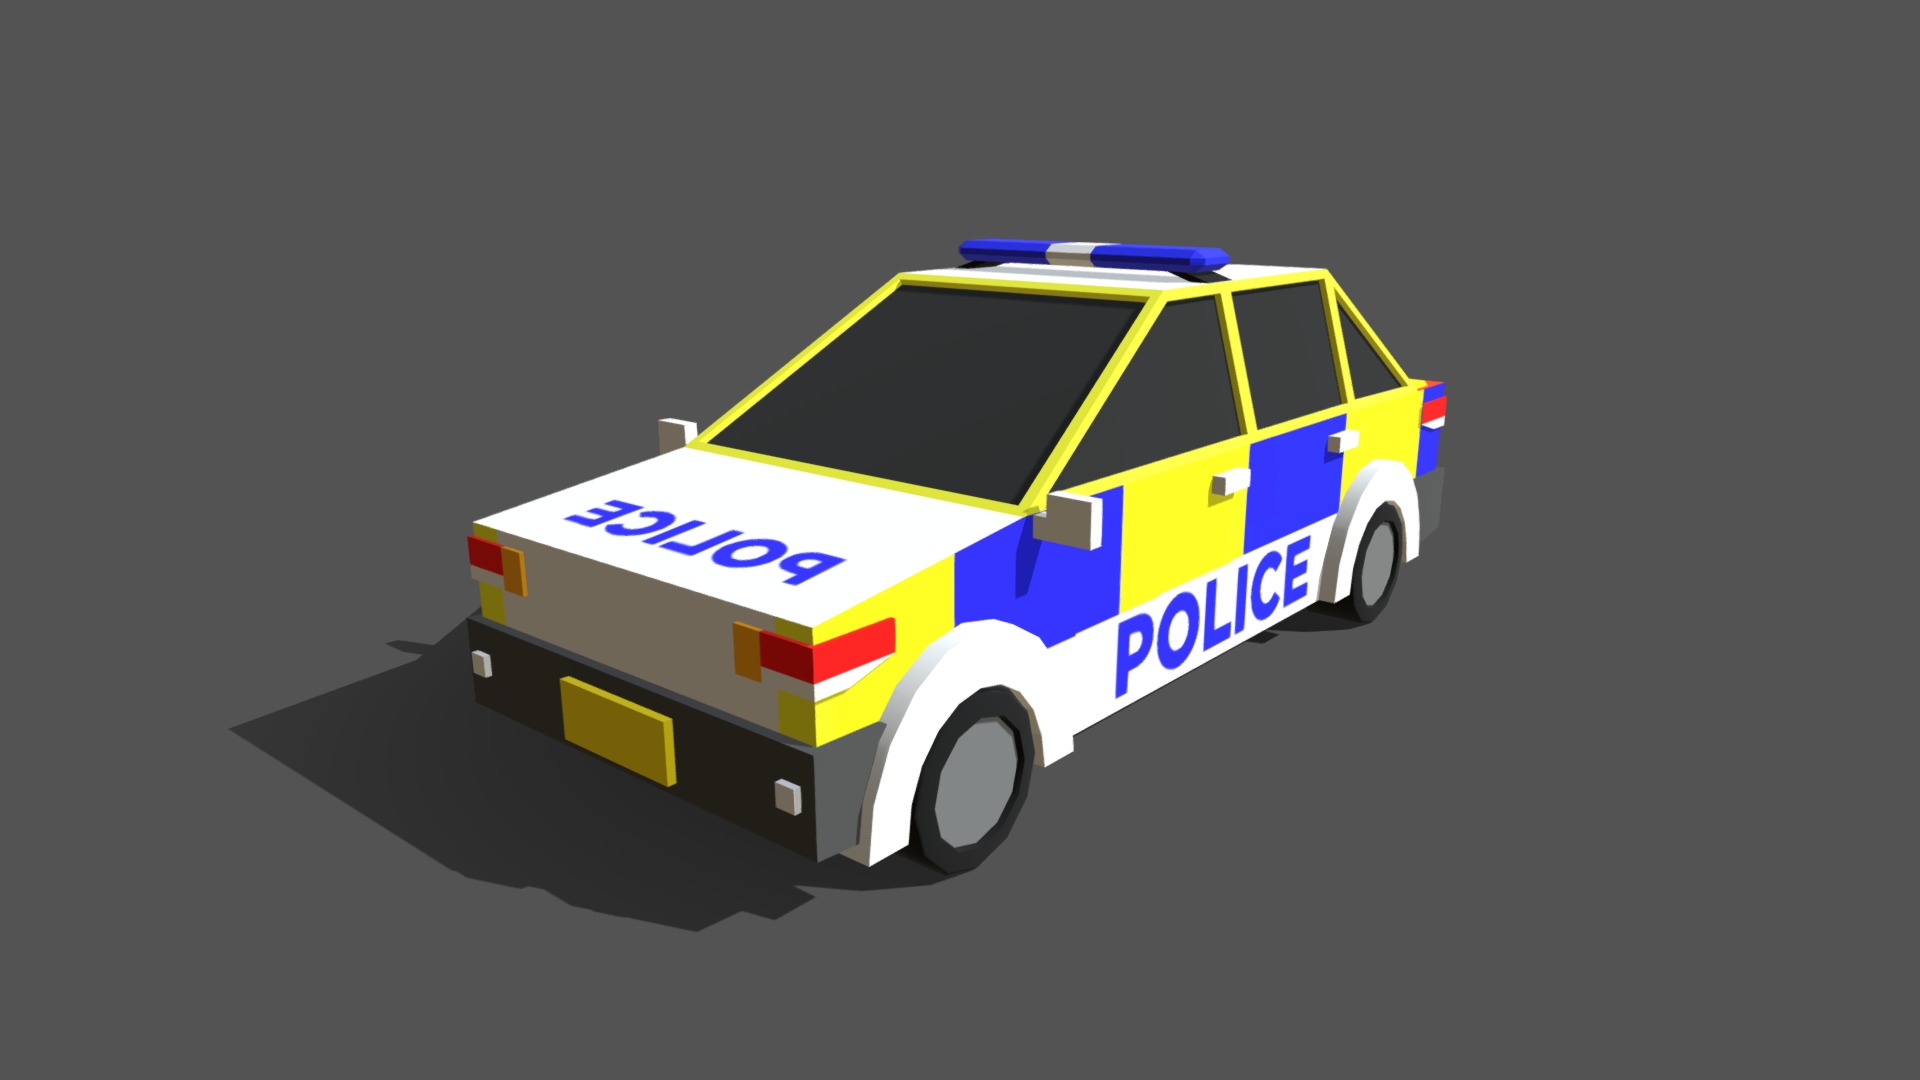 3D model Police Car - This is a 3D model of the Police Car. The 3D model is about a police car with a blue light.